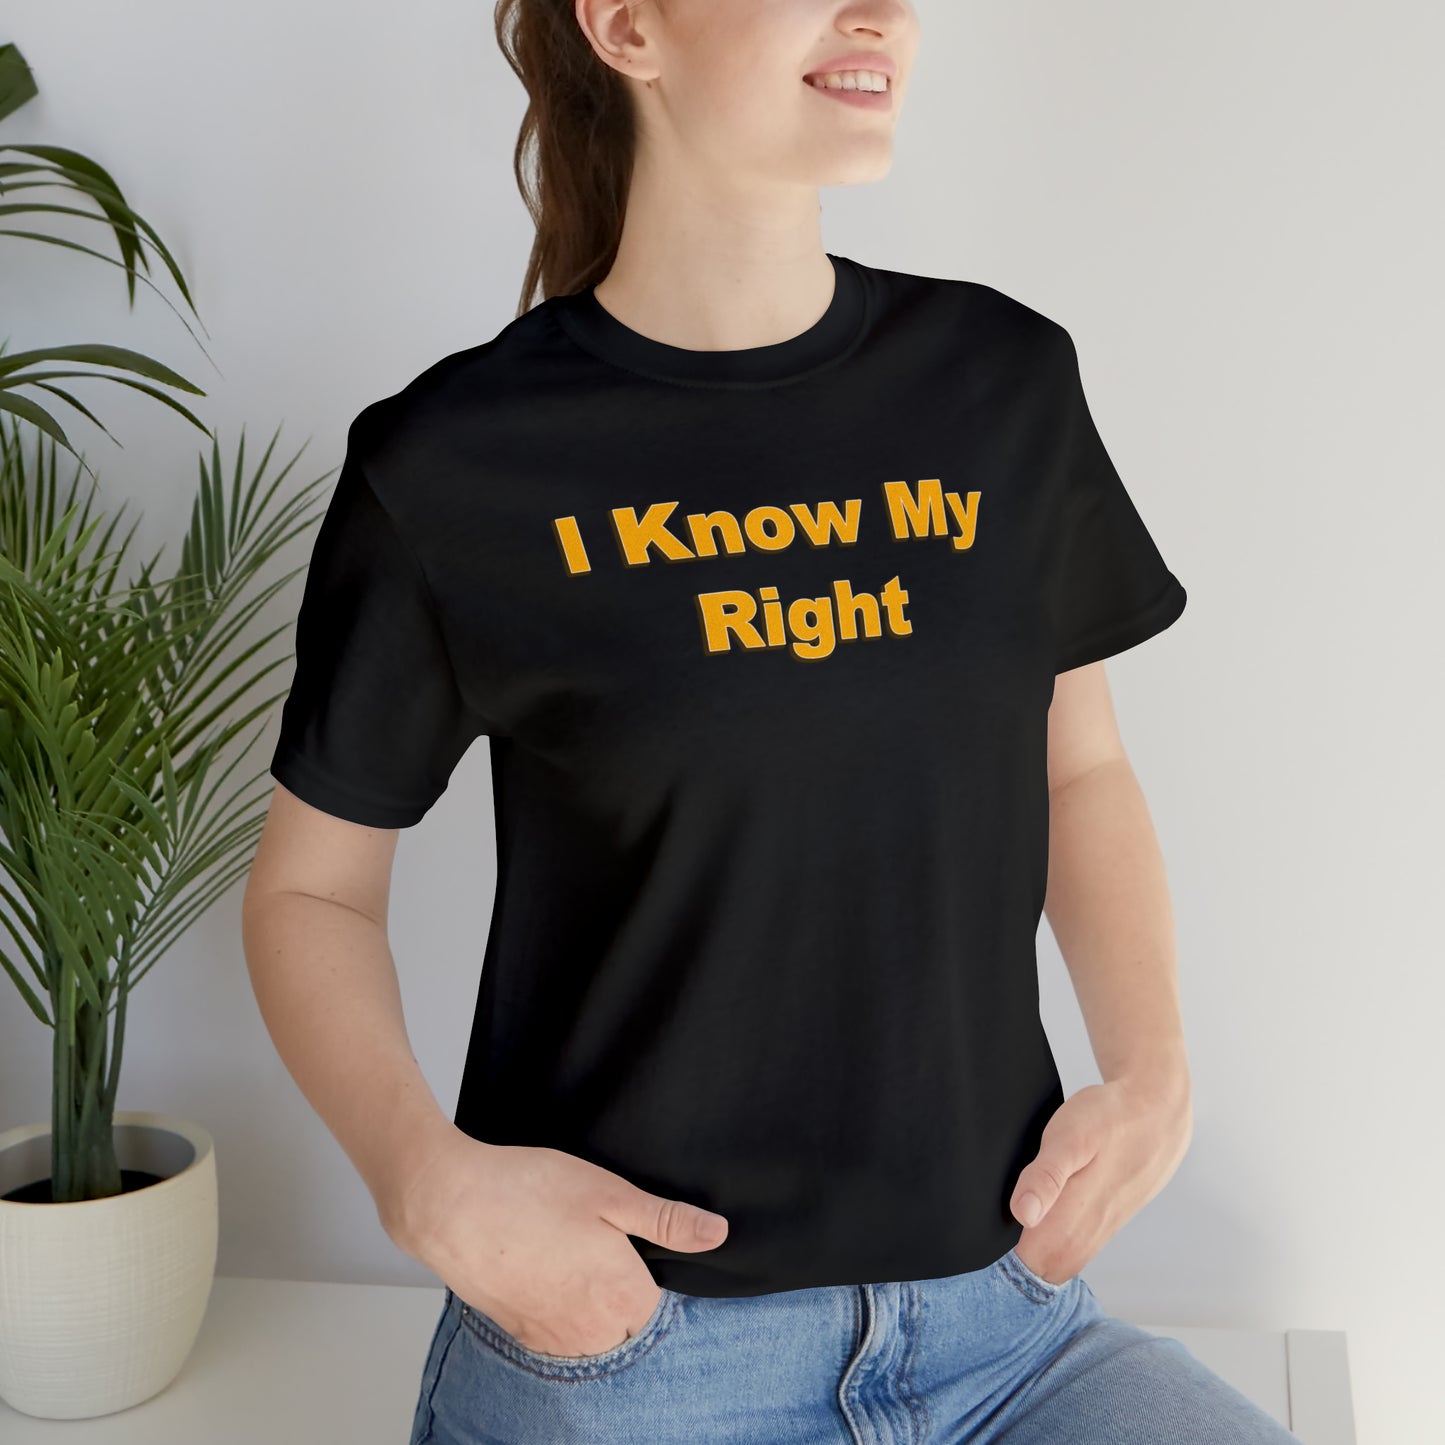 I KNOW MY RIGHT